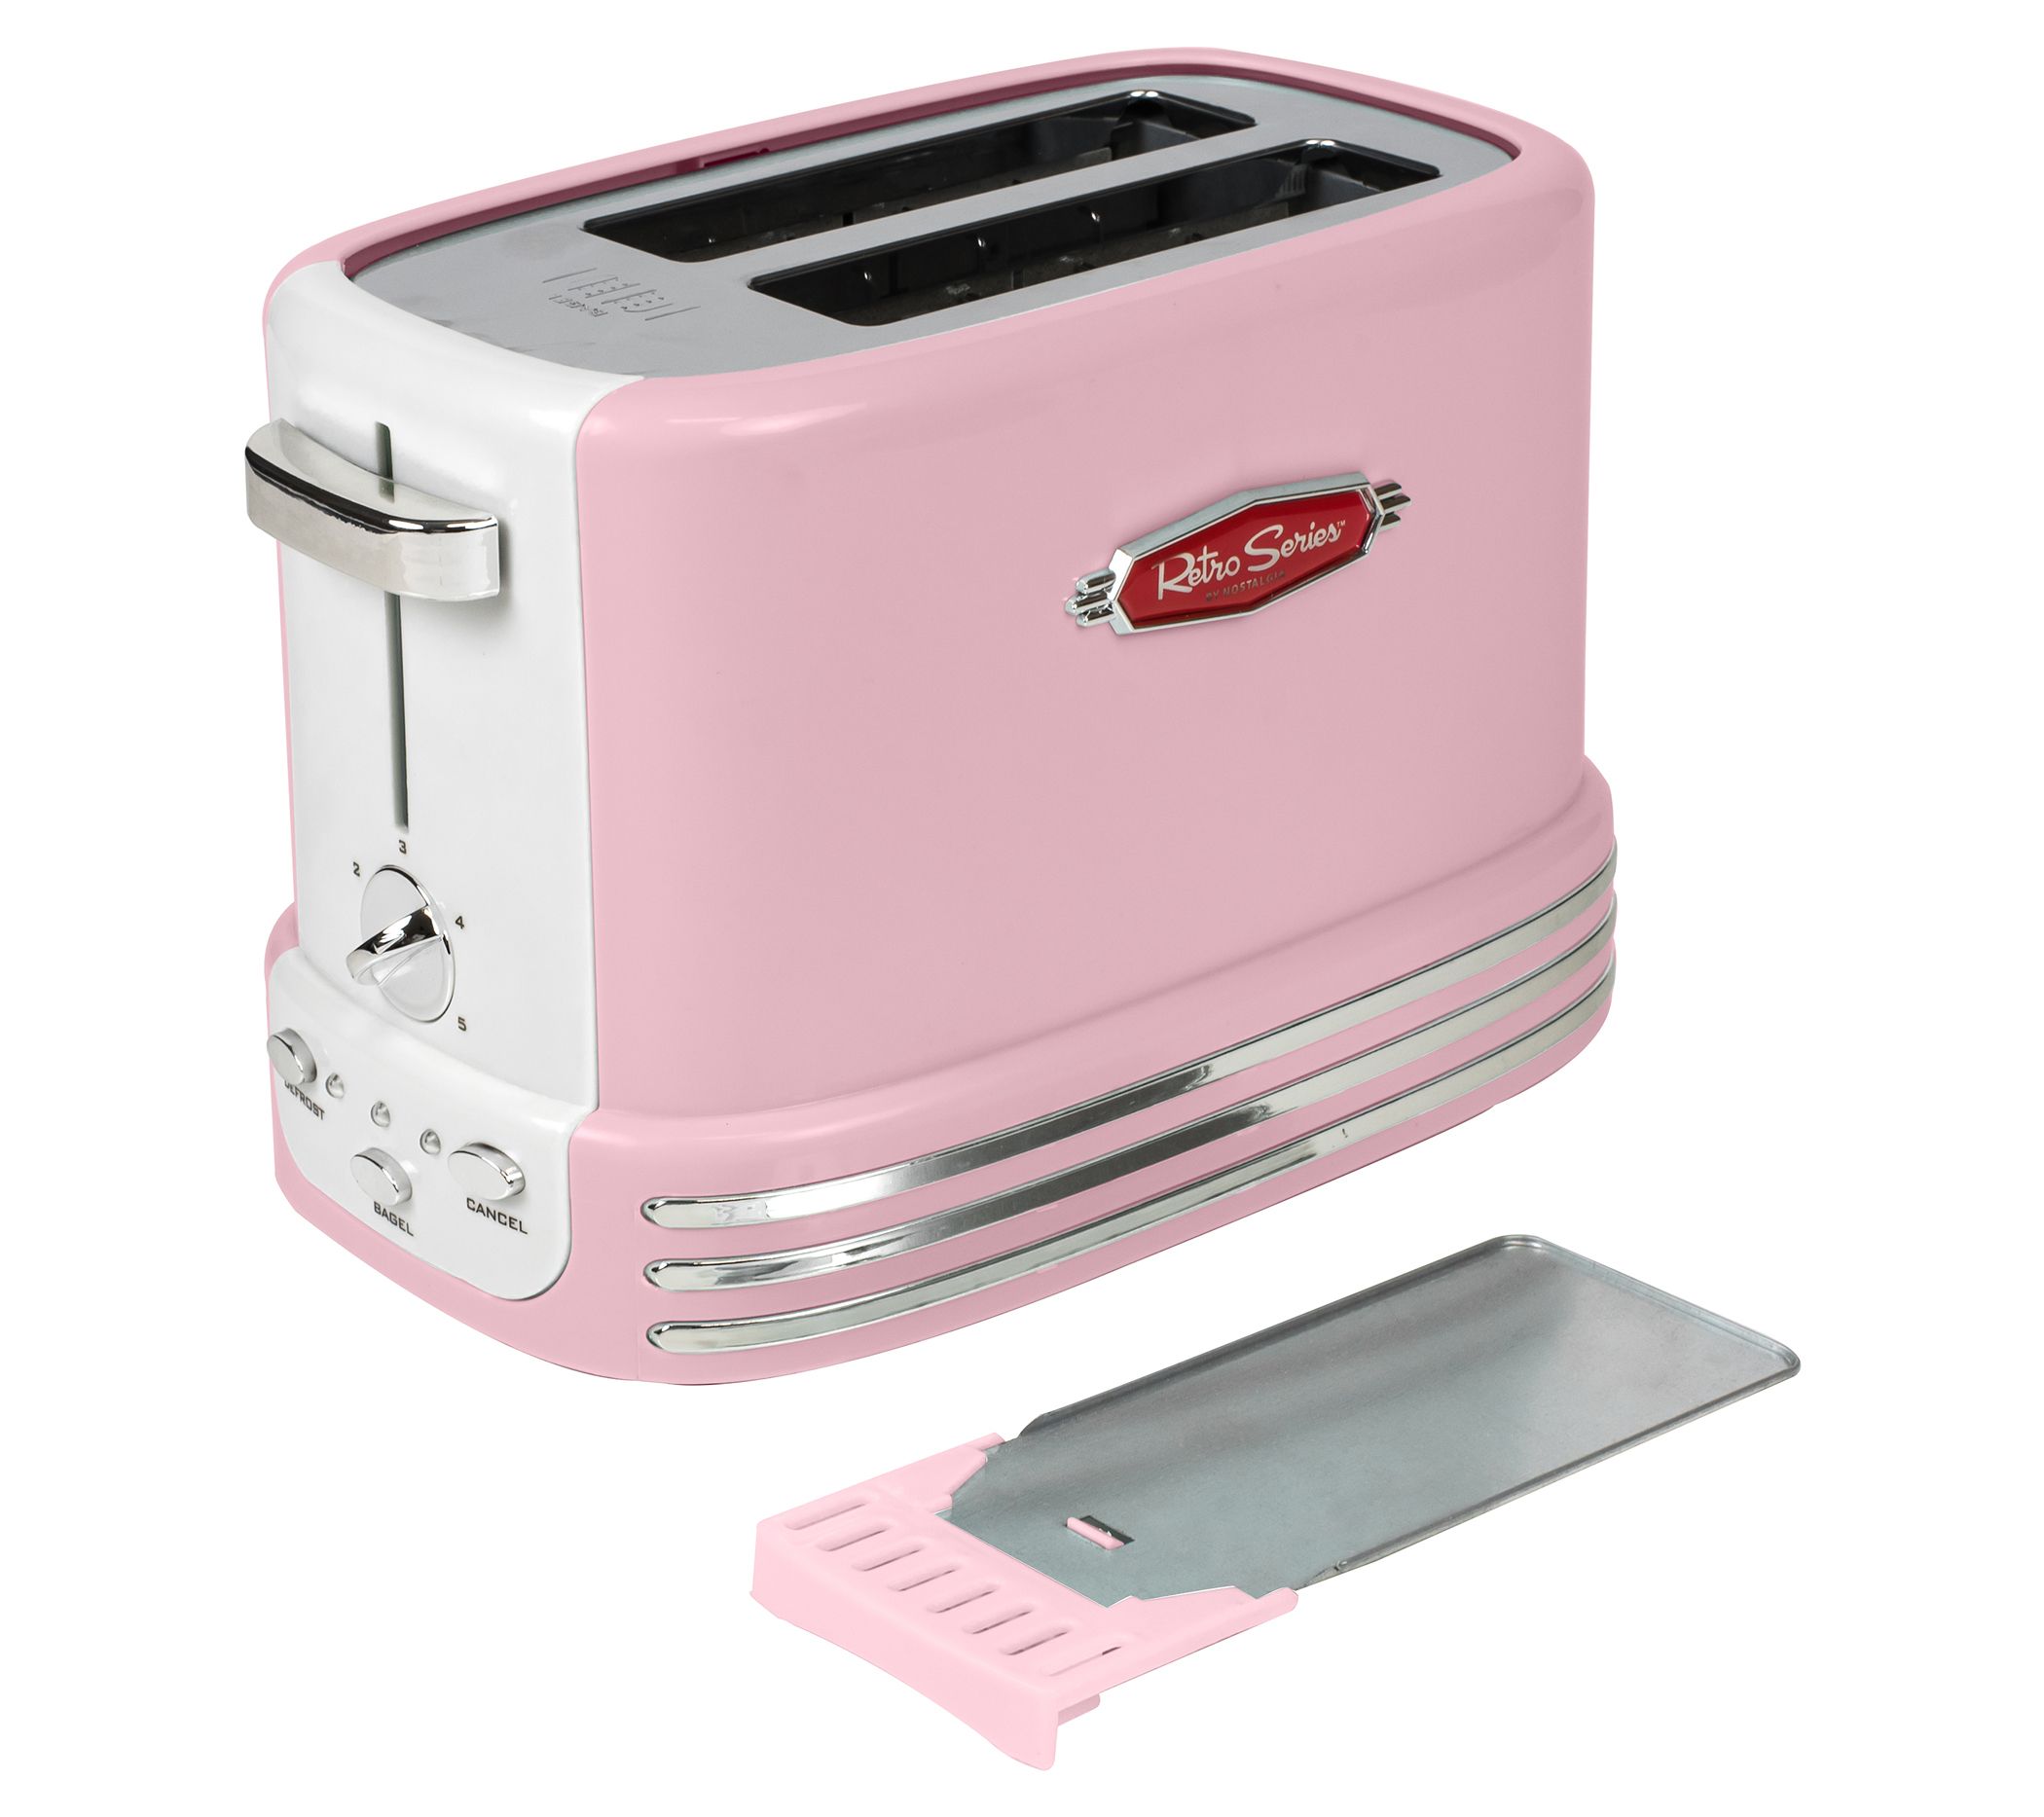 Generic Toaster 2 Slice, Retro Small Toaster With Bagel